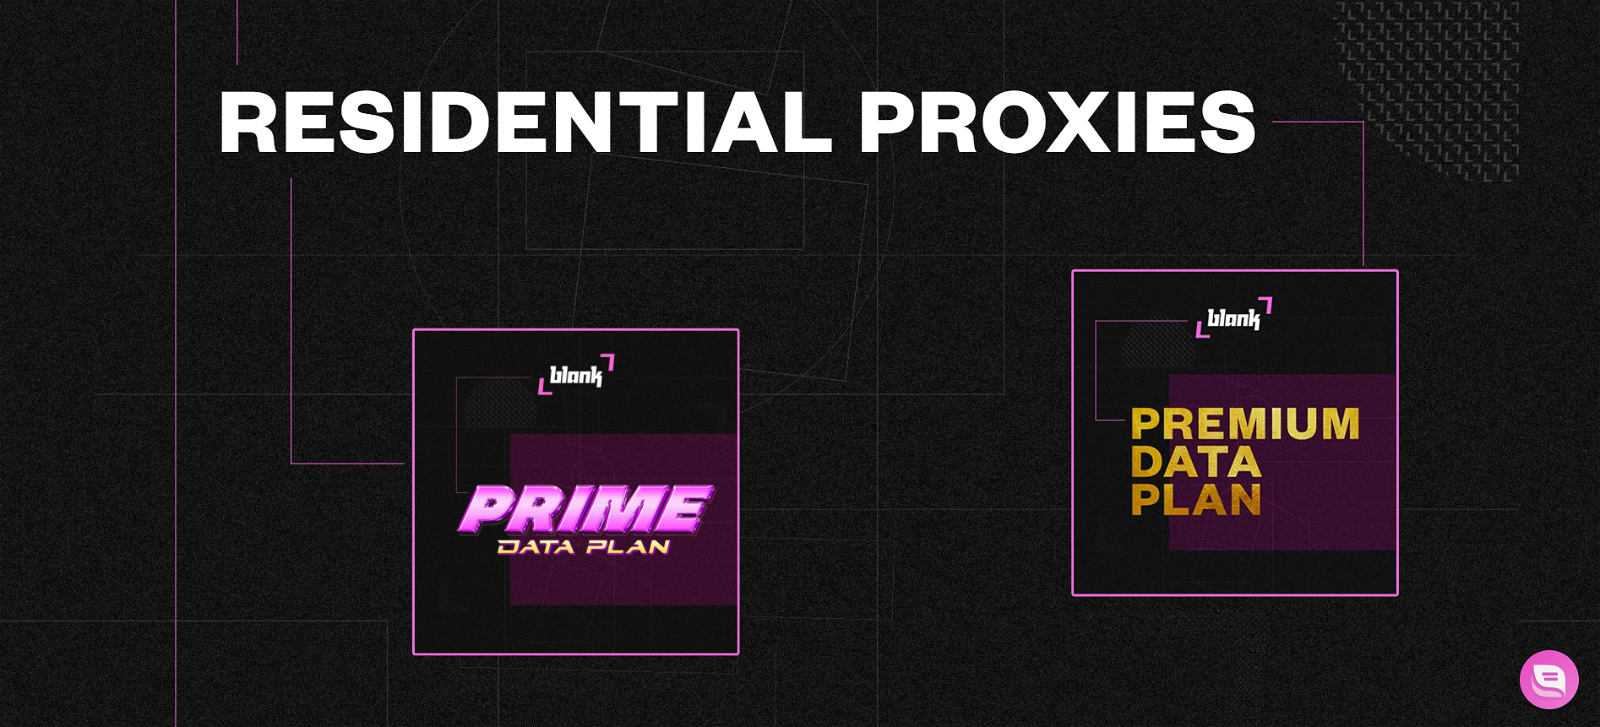 Blank Proxies sneaker proxy residential proxies datacenter